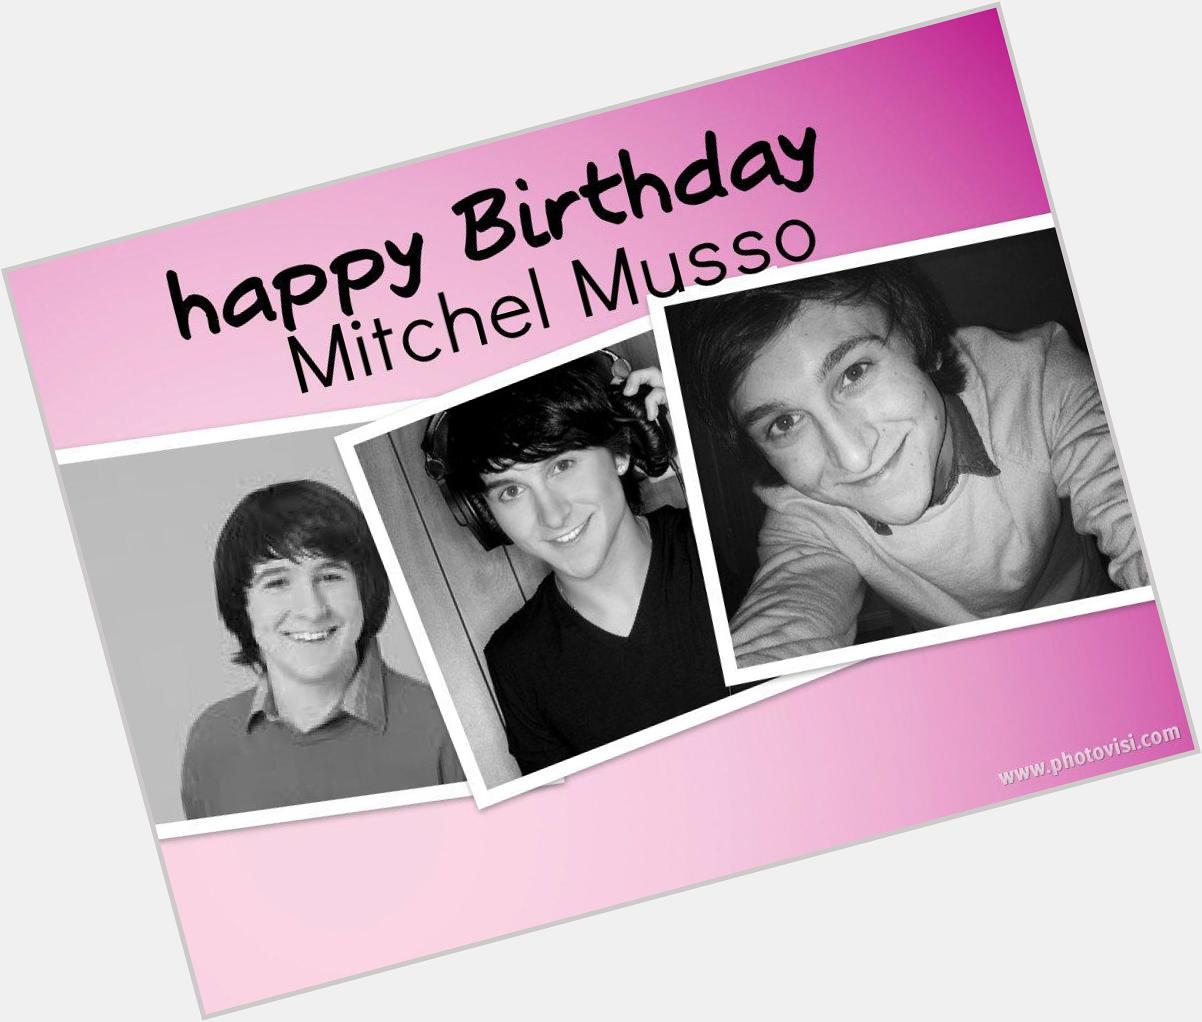  Happy Birthday to You
Happy Birthday to You
Happy Birthday Dear Mitchel Musso 
Happy Birthday to You. 